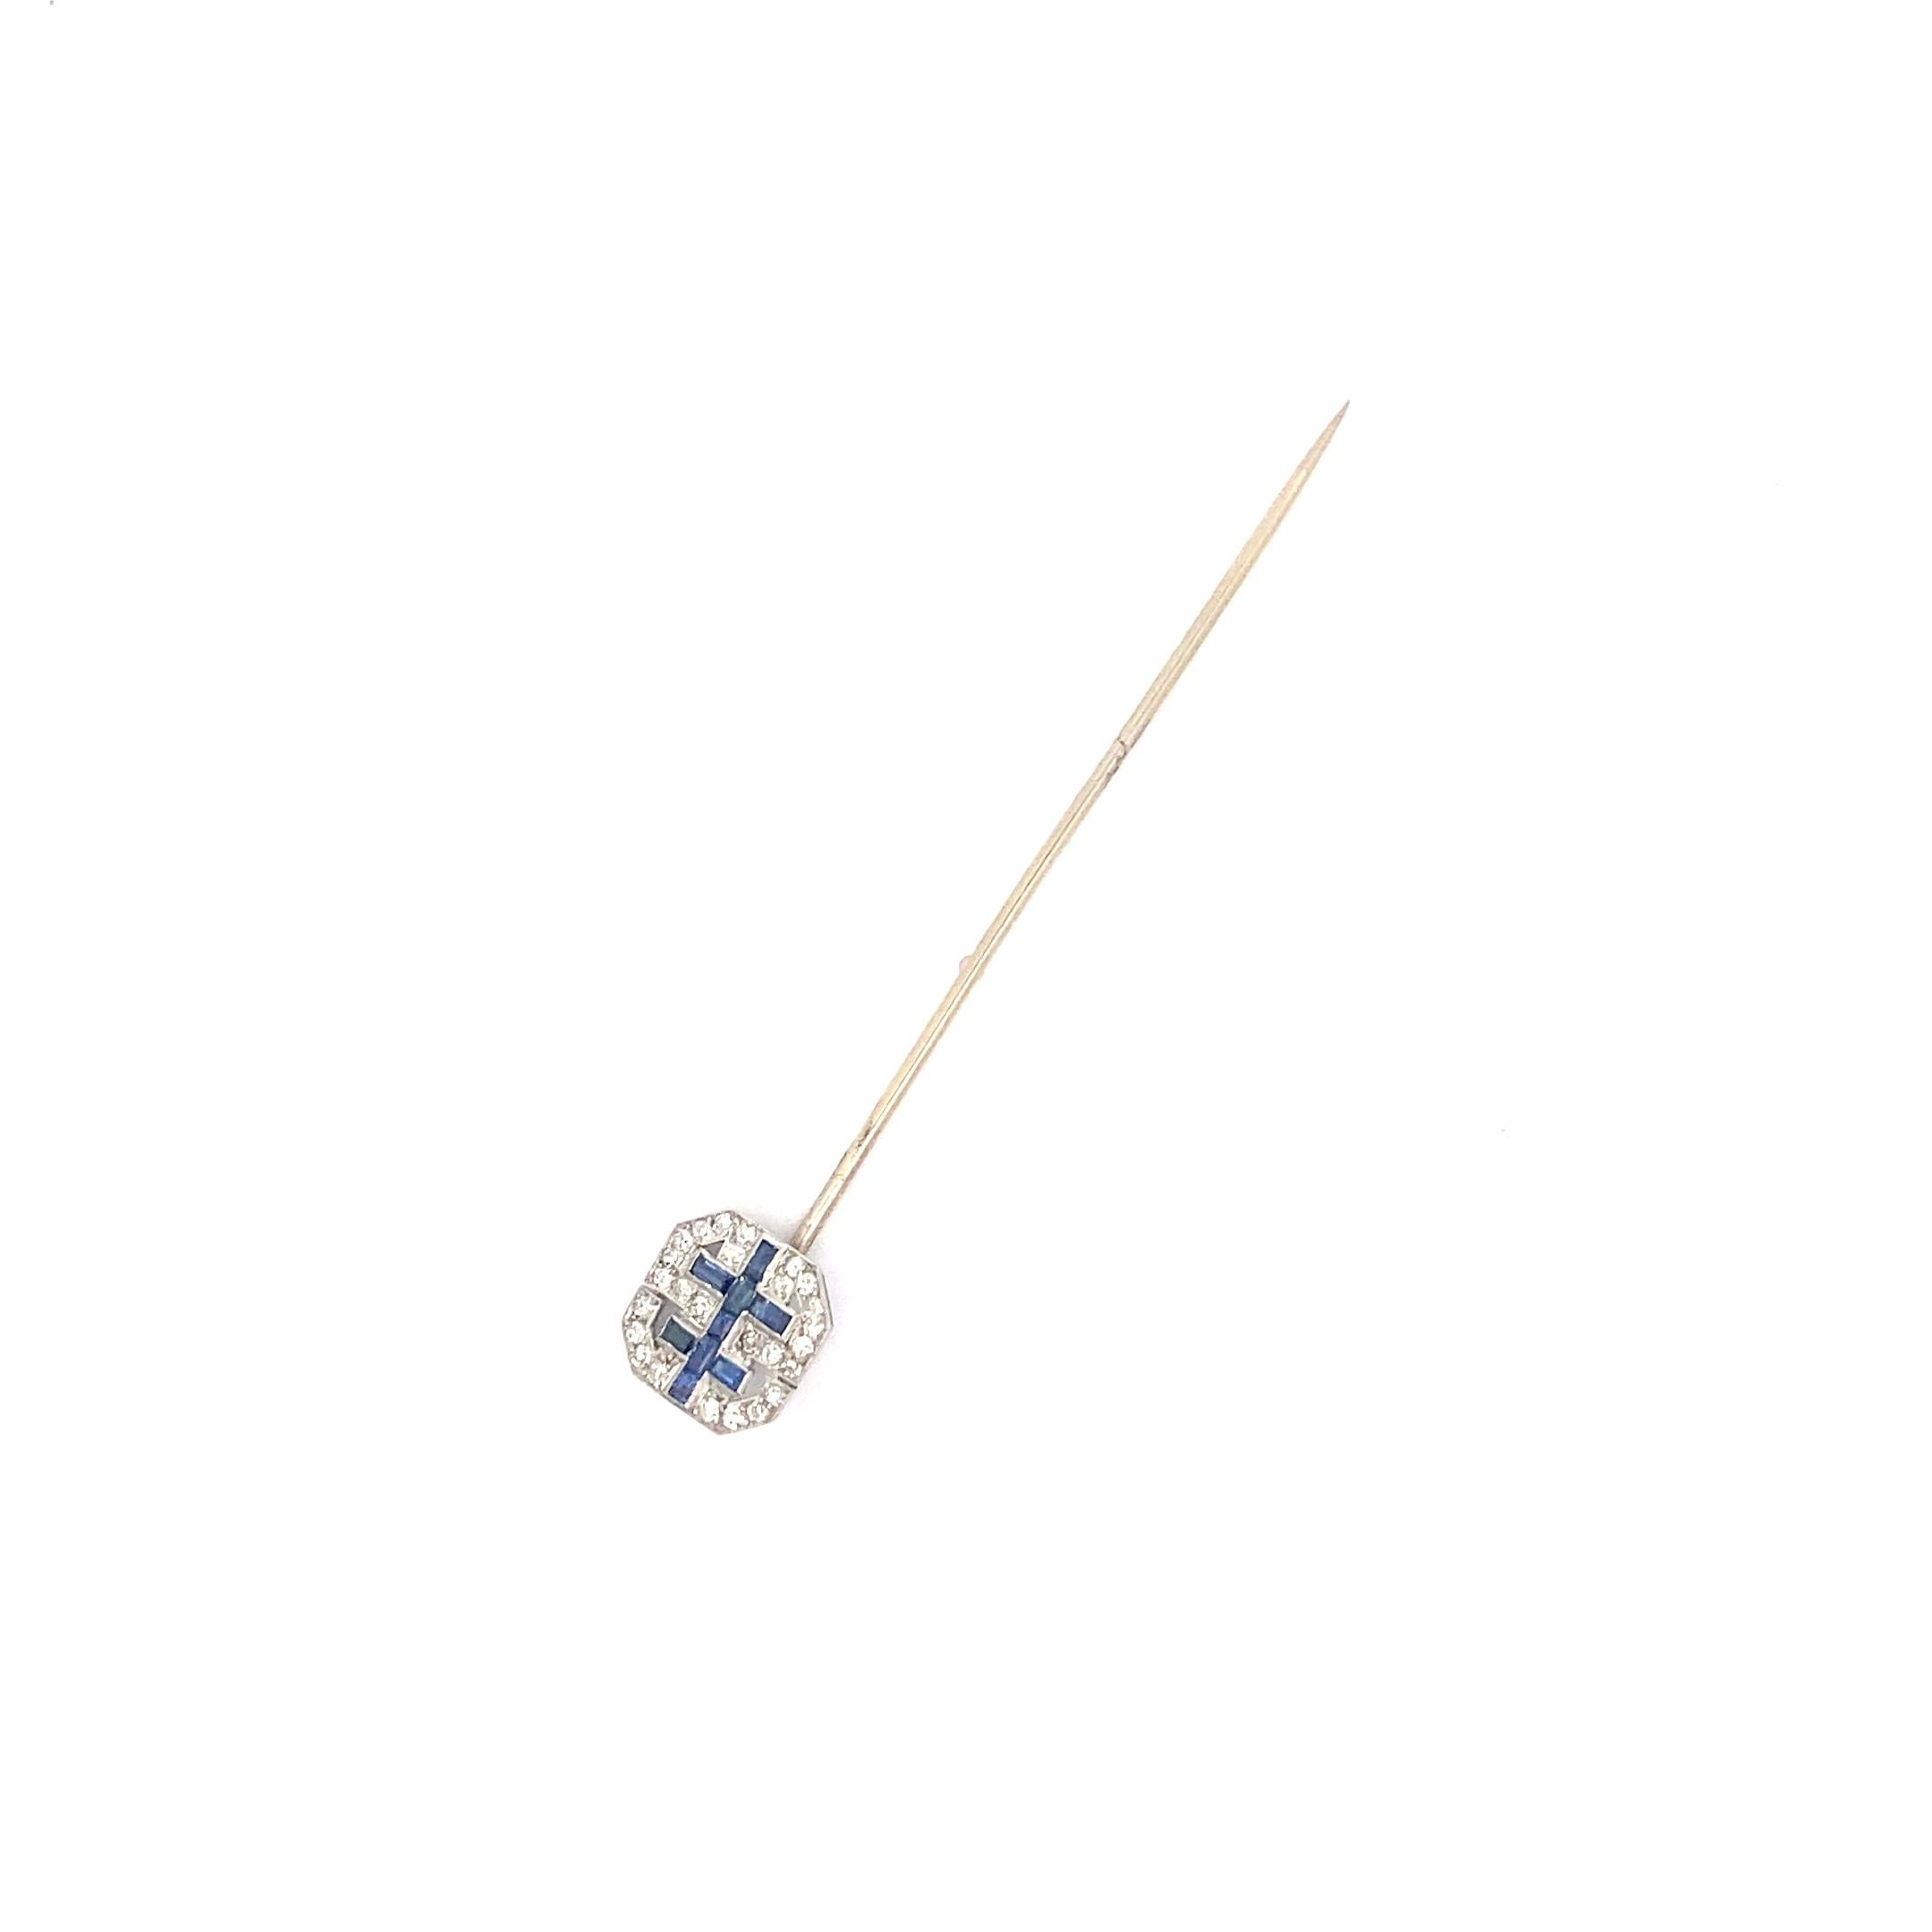 French Cut Antique french 18k Diamond & Sapphire Stick Pin (Patterned Sapphires) For Sale